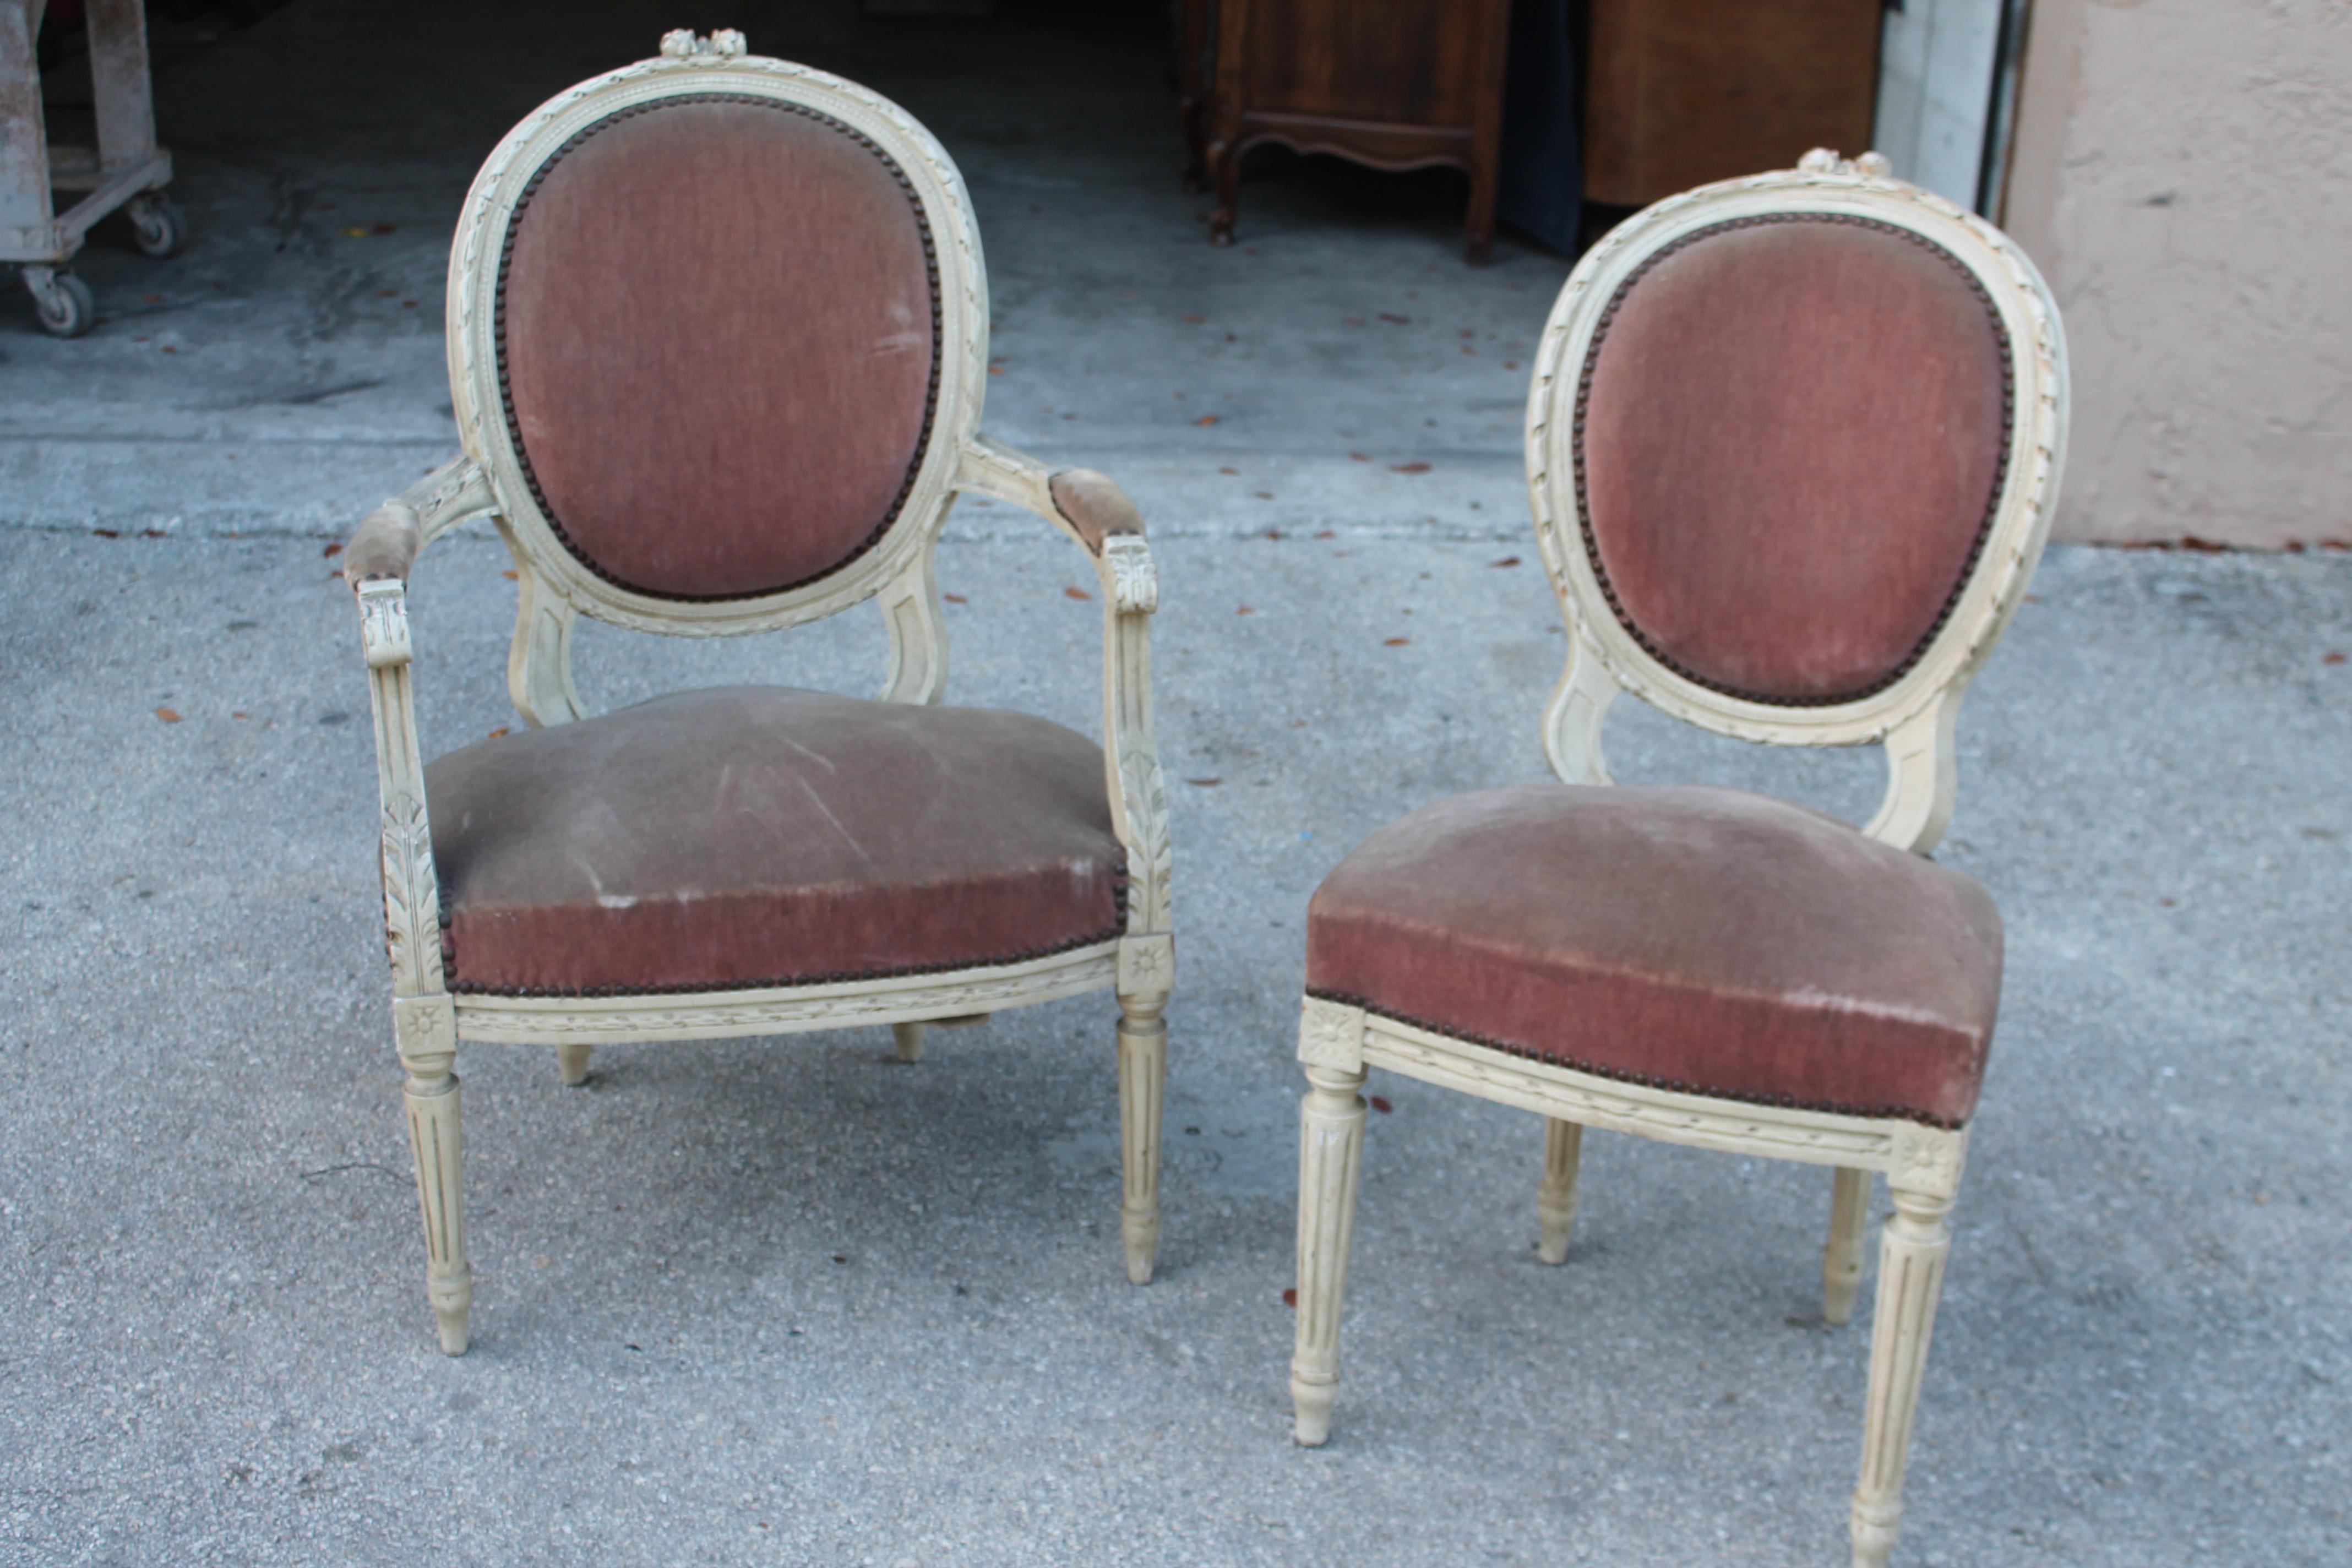 One 19thc French Louis XVI Carved Wood Arm Chair and One LXVI Side Chair.  These beautifully framed chairs are sturdy and they are ready for reupholstery. Wood is really good and fabric is original and is in need of replacement. Gorgeous chairs and